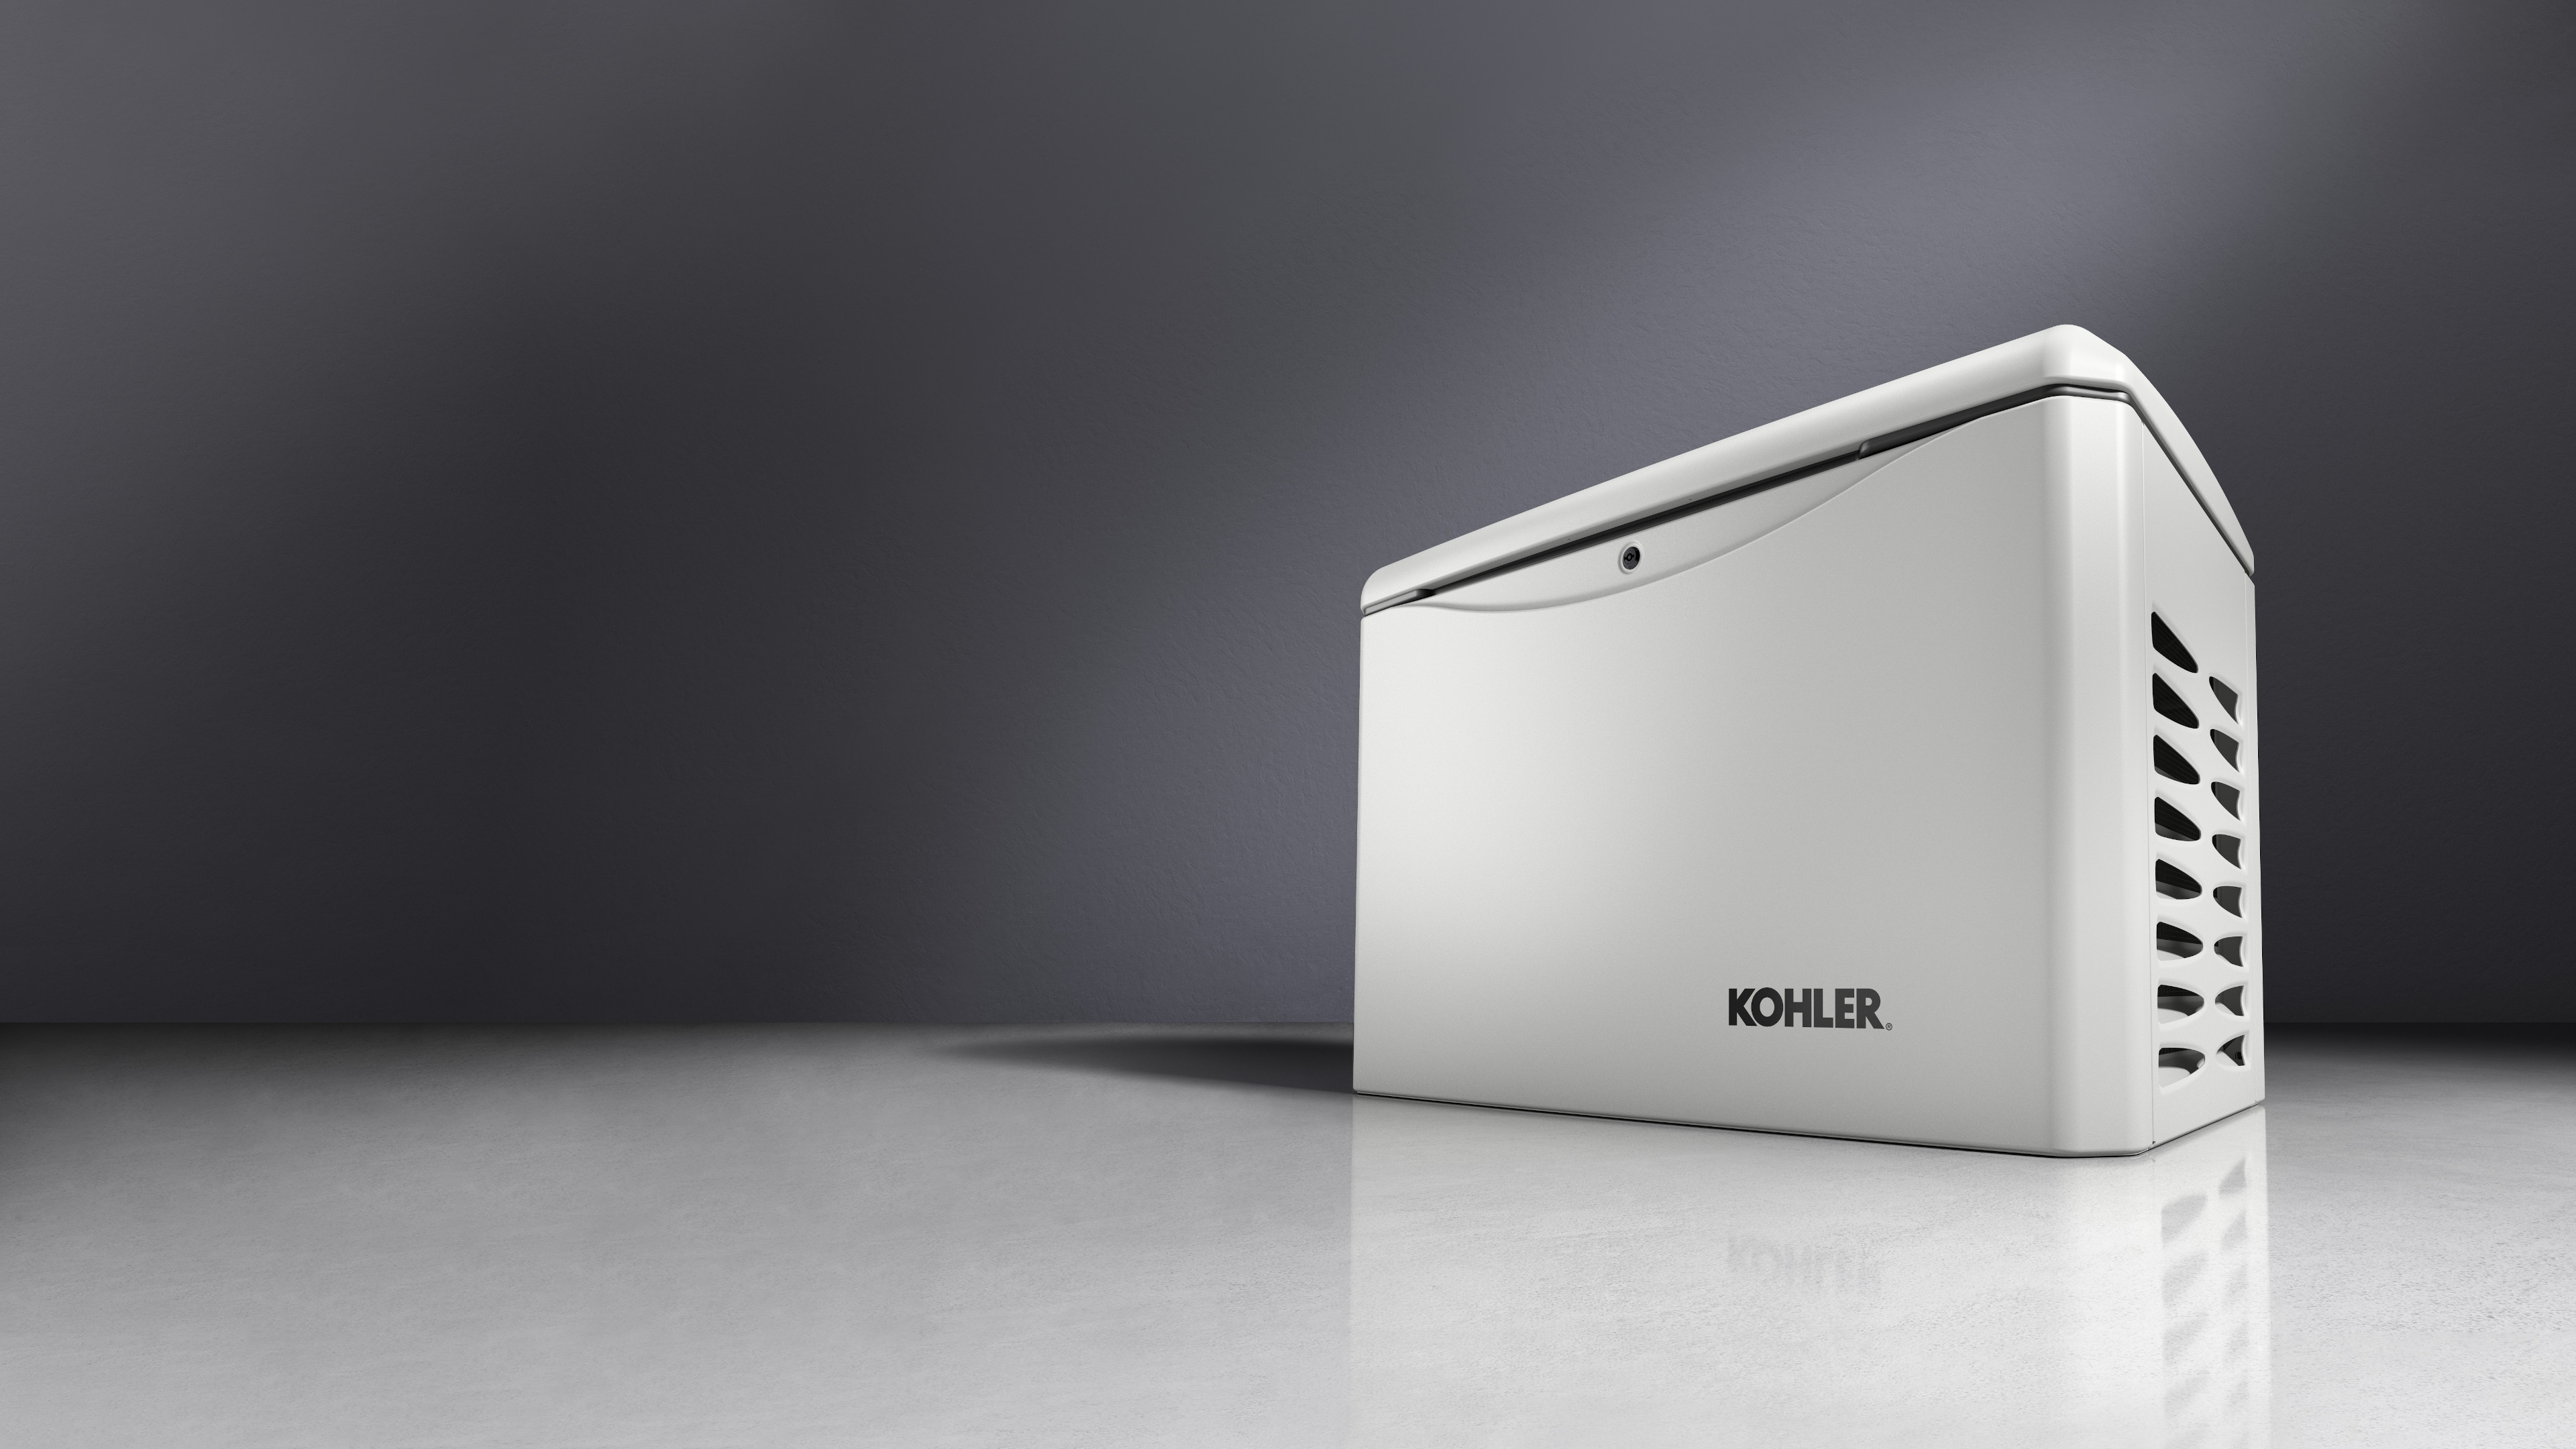 Pegasus color Kohler residential generator with ventilated side panels, showcased against a gradient gray background.